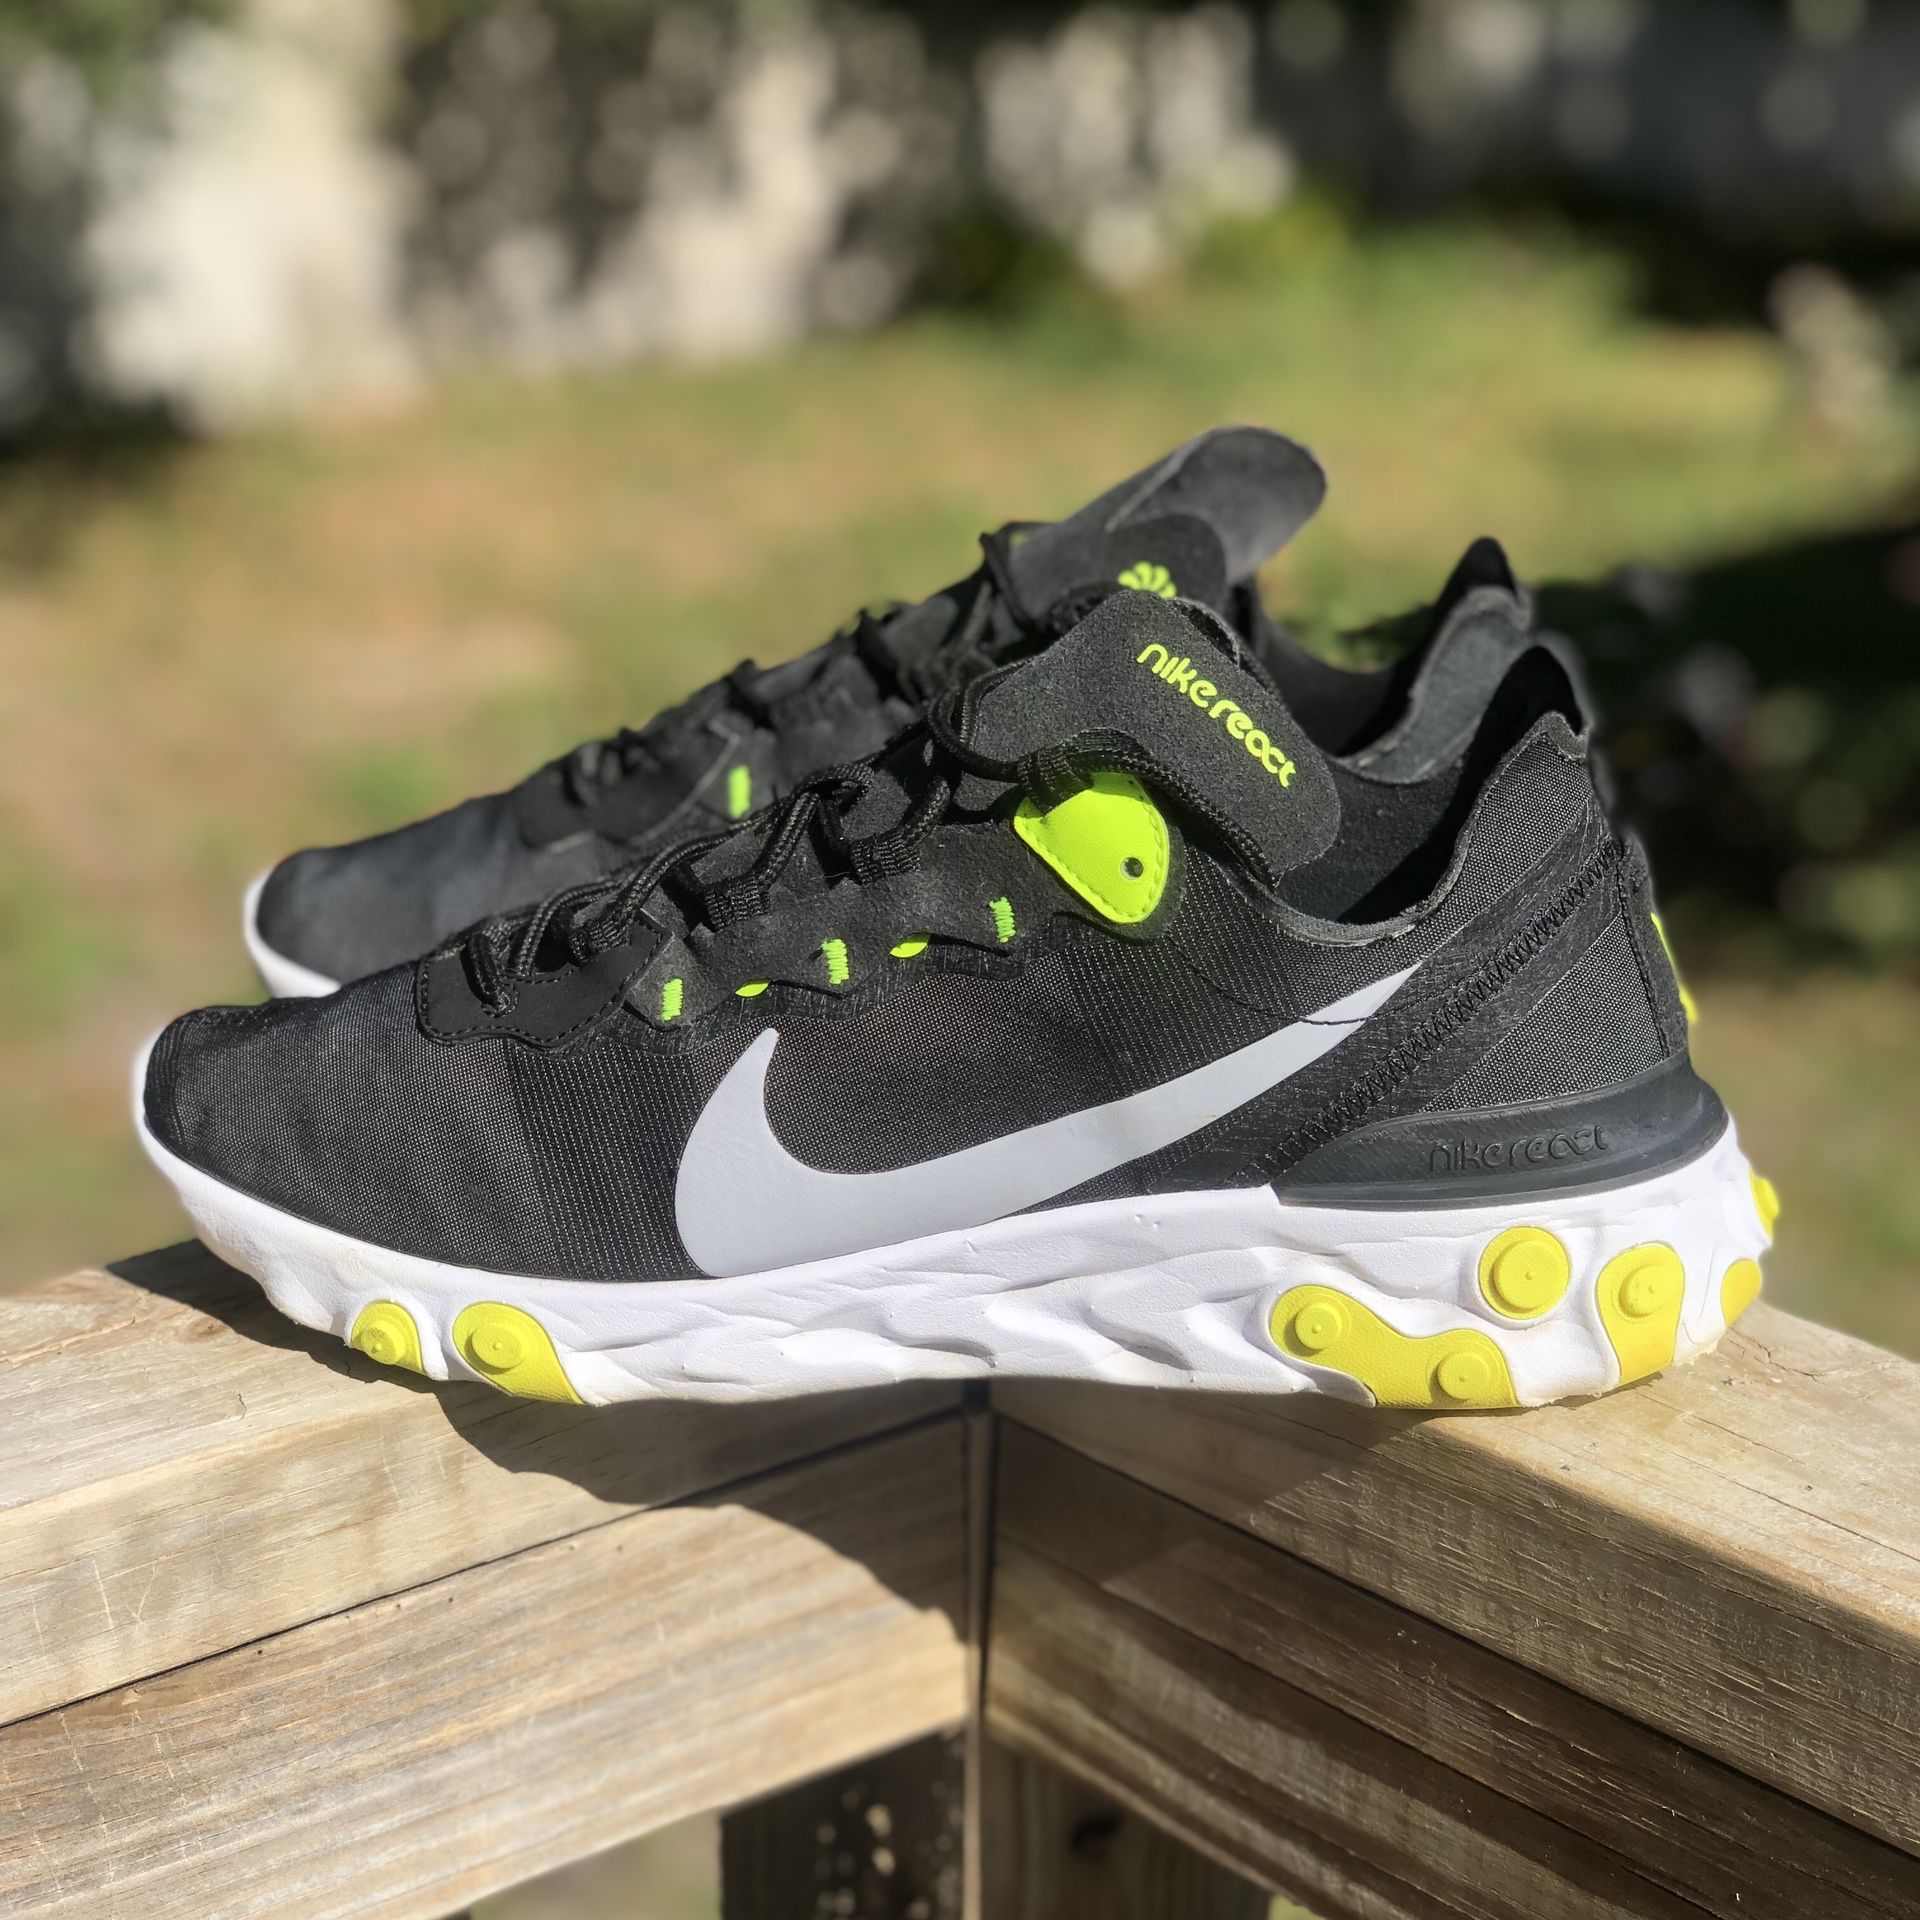 officieel Tub regelmatig Nike React Element 55 - Mens Atheltic Shoes bq6166-001 Low Top Mens Size 9  for Sale in Lutz, FL - OfferUp